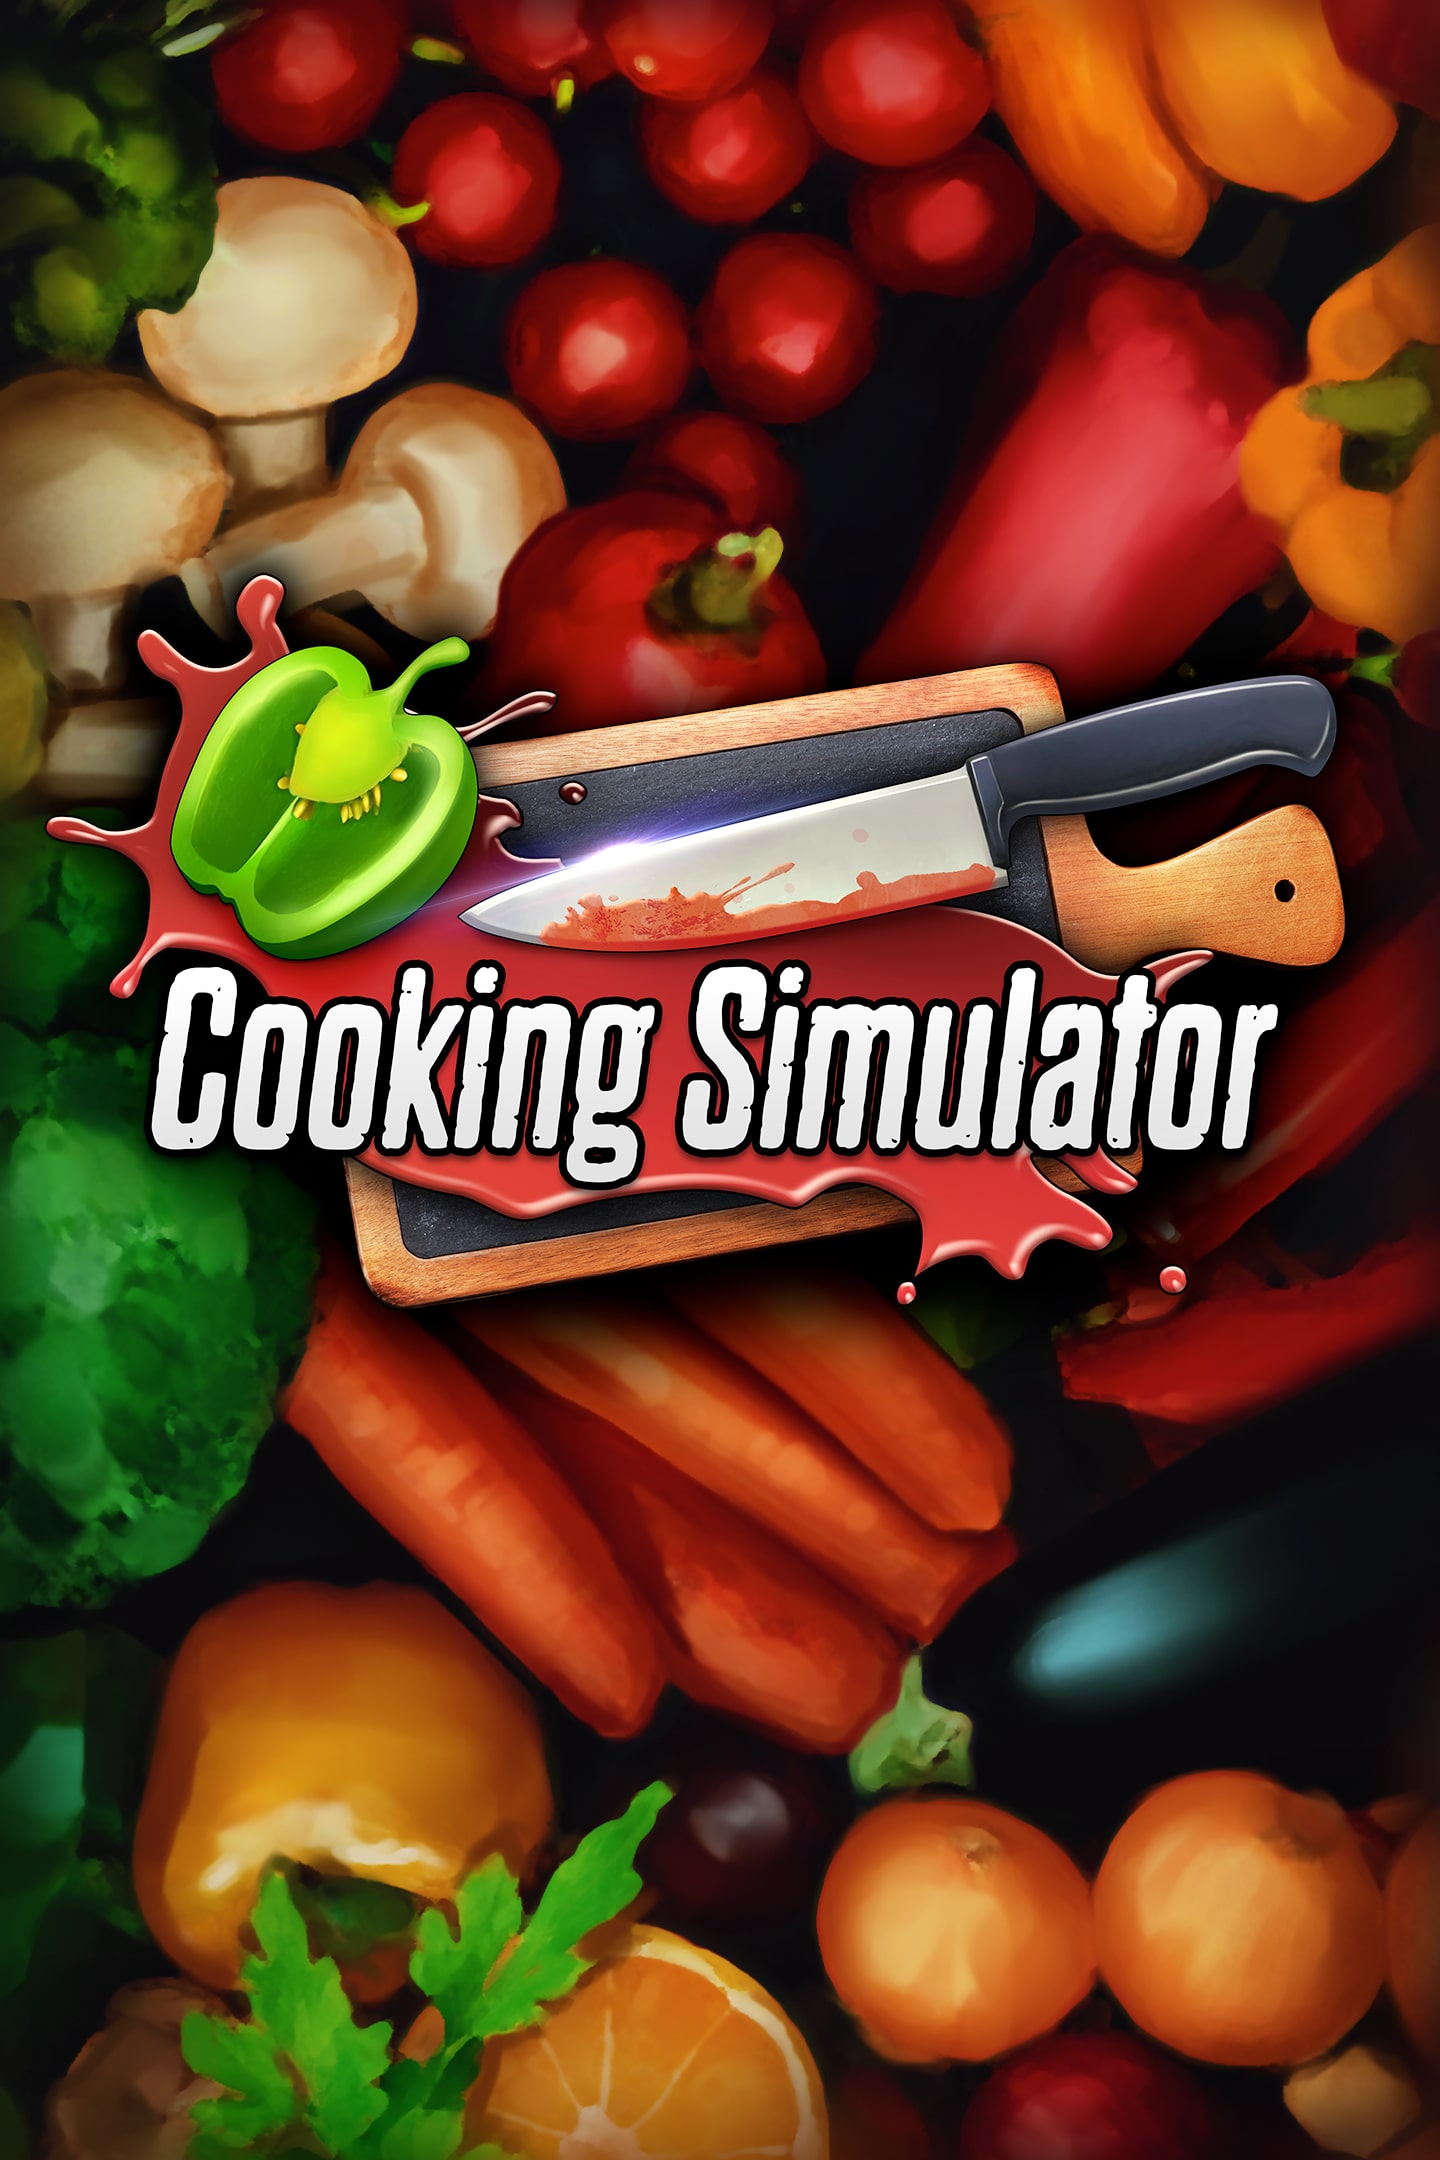 Buy Cooking Simulator (PC) - Steam Gift - GLOBAL - Cheap - !